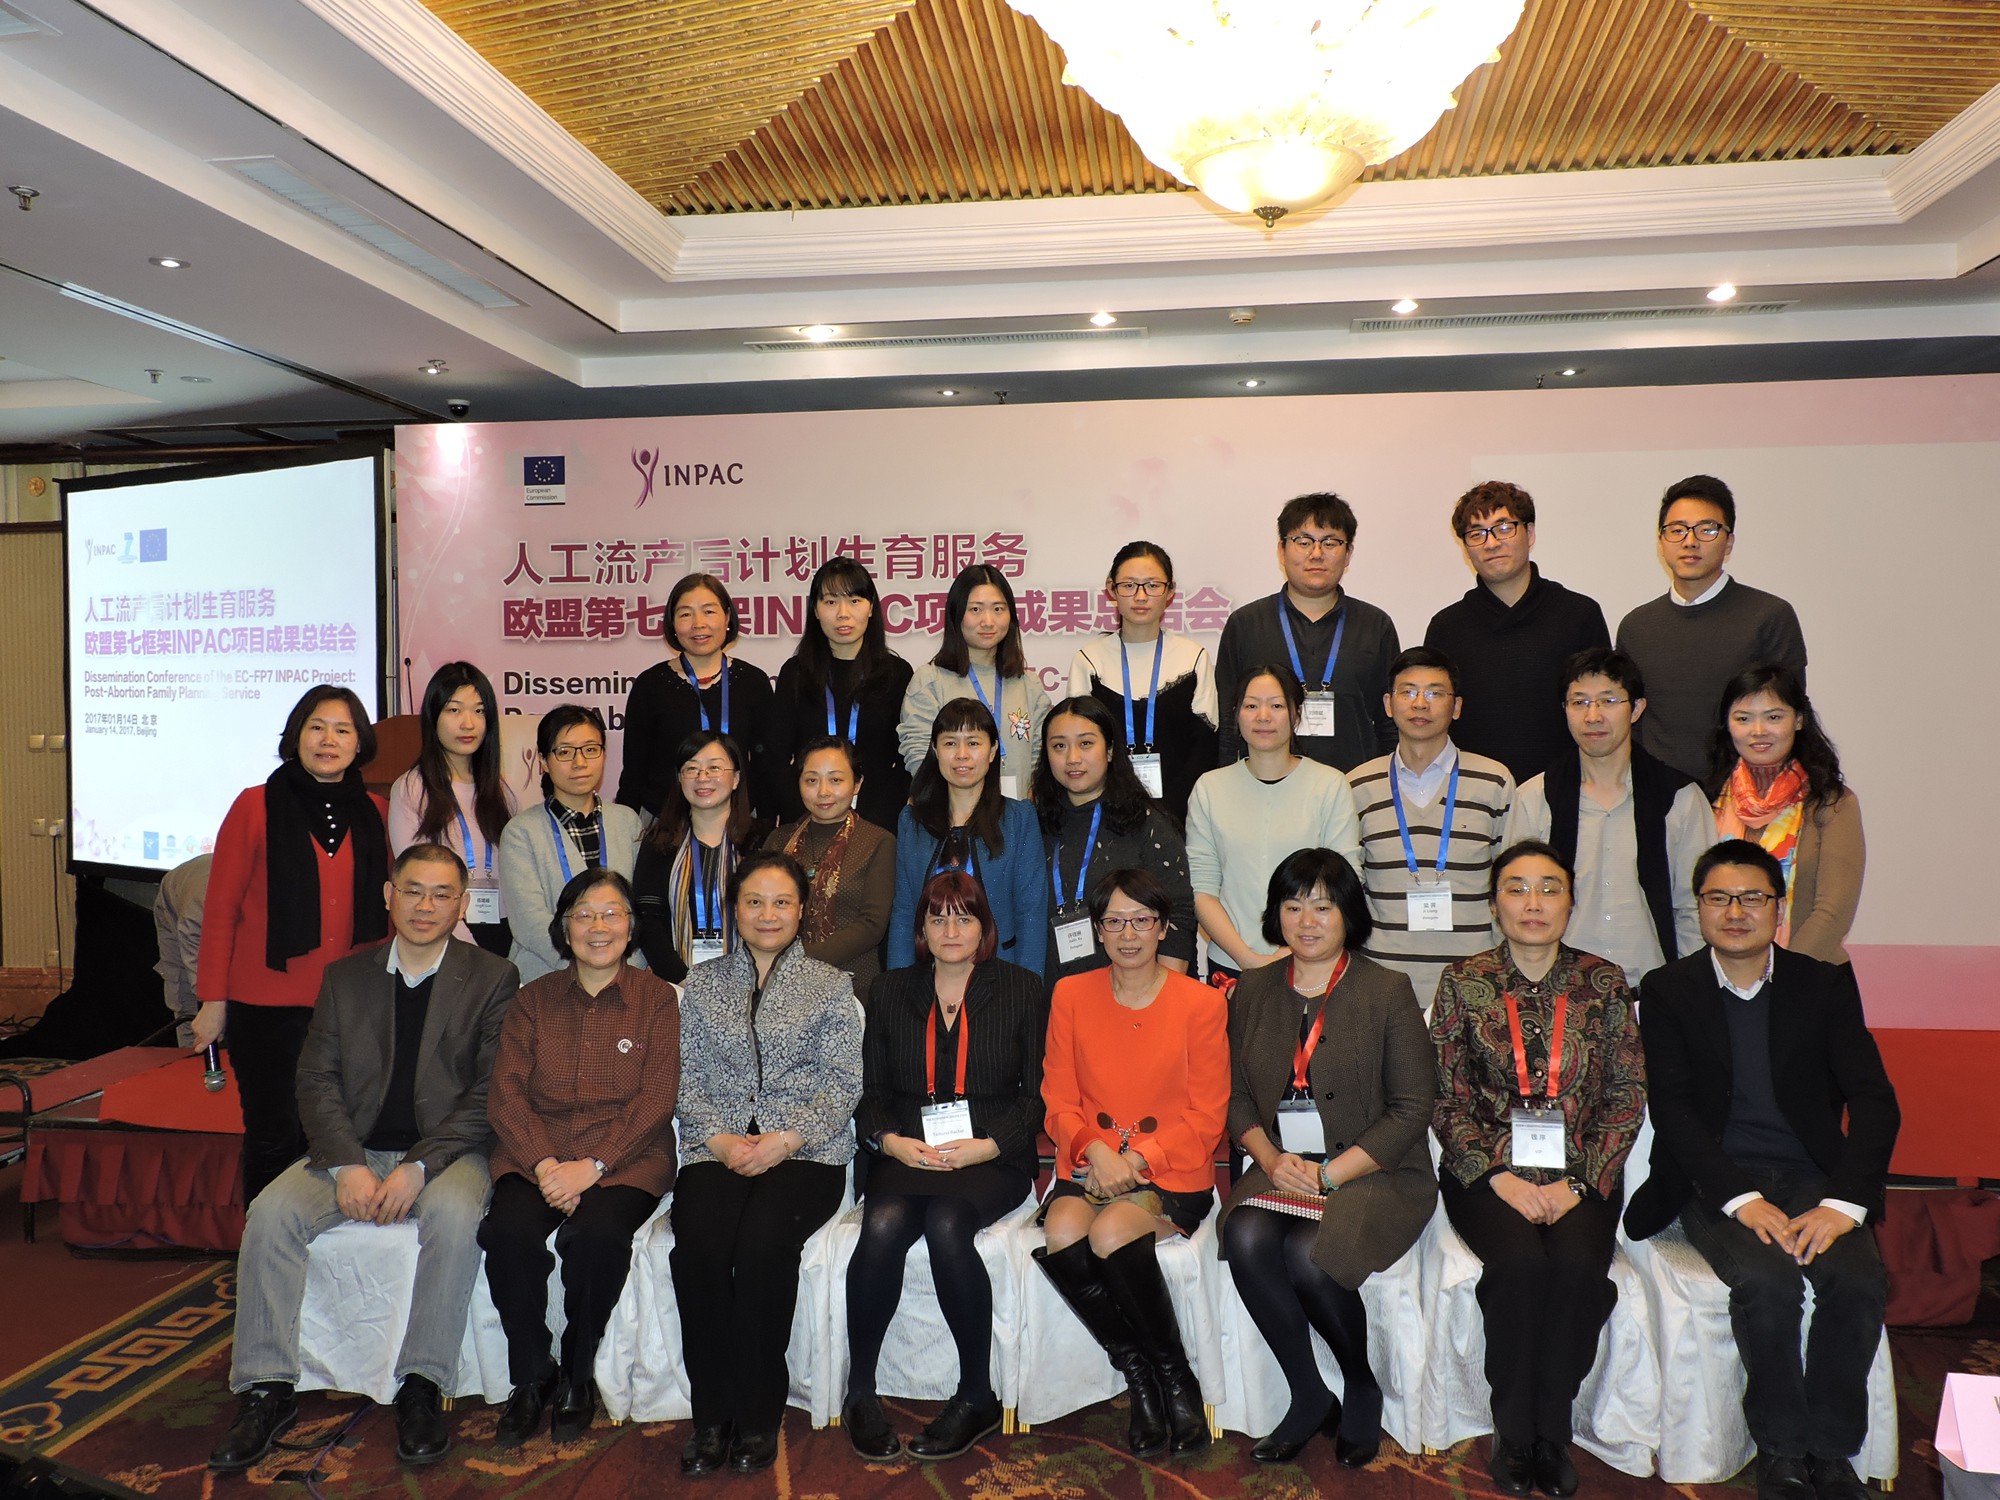 INPAC - INtegrating Post-Abortion family planning services into existing abortion services in hospital settings in China